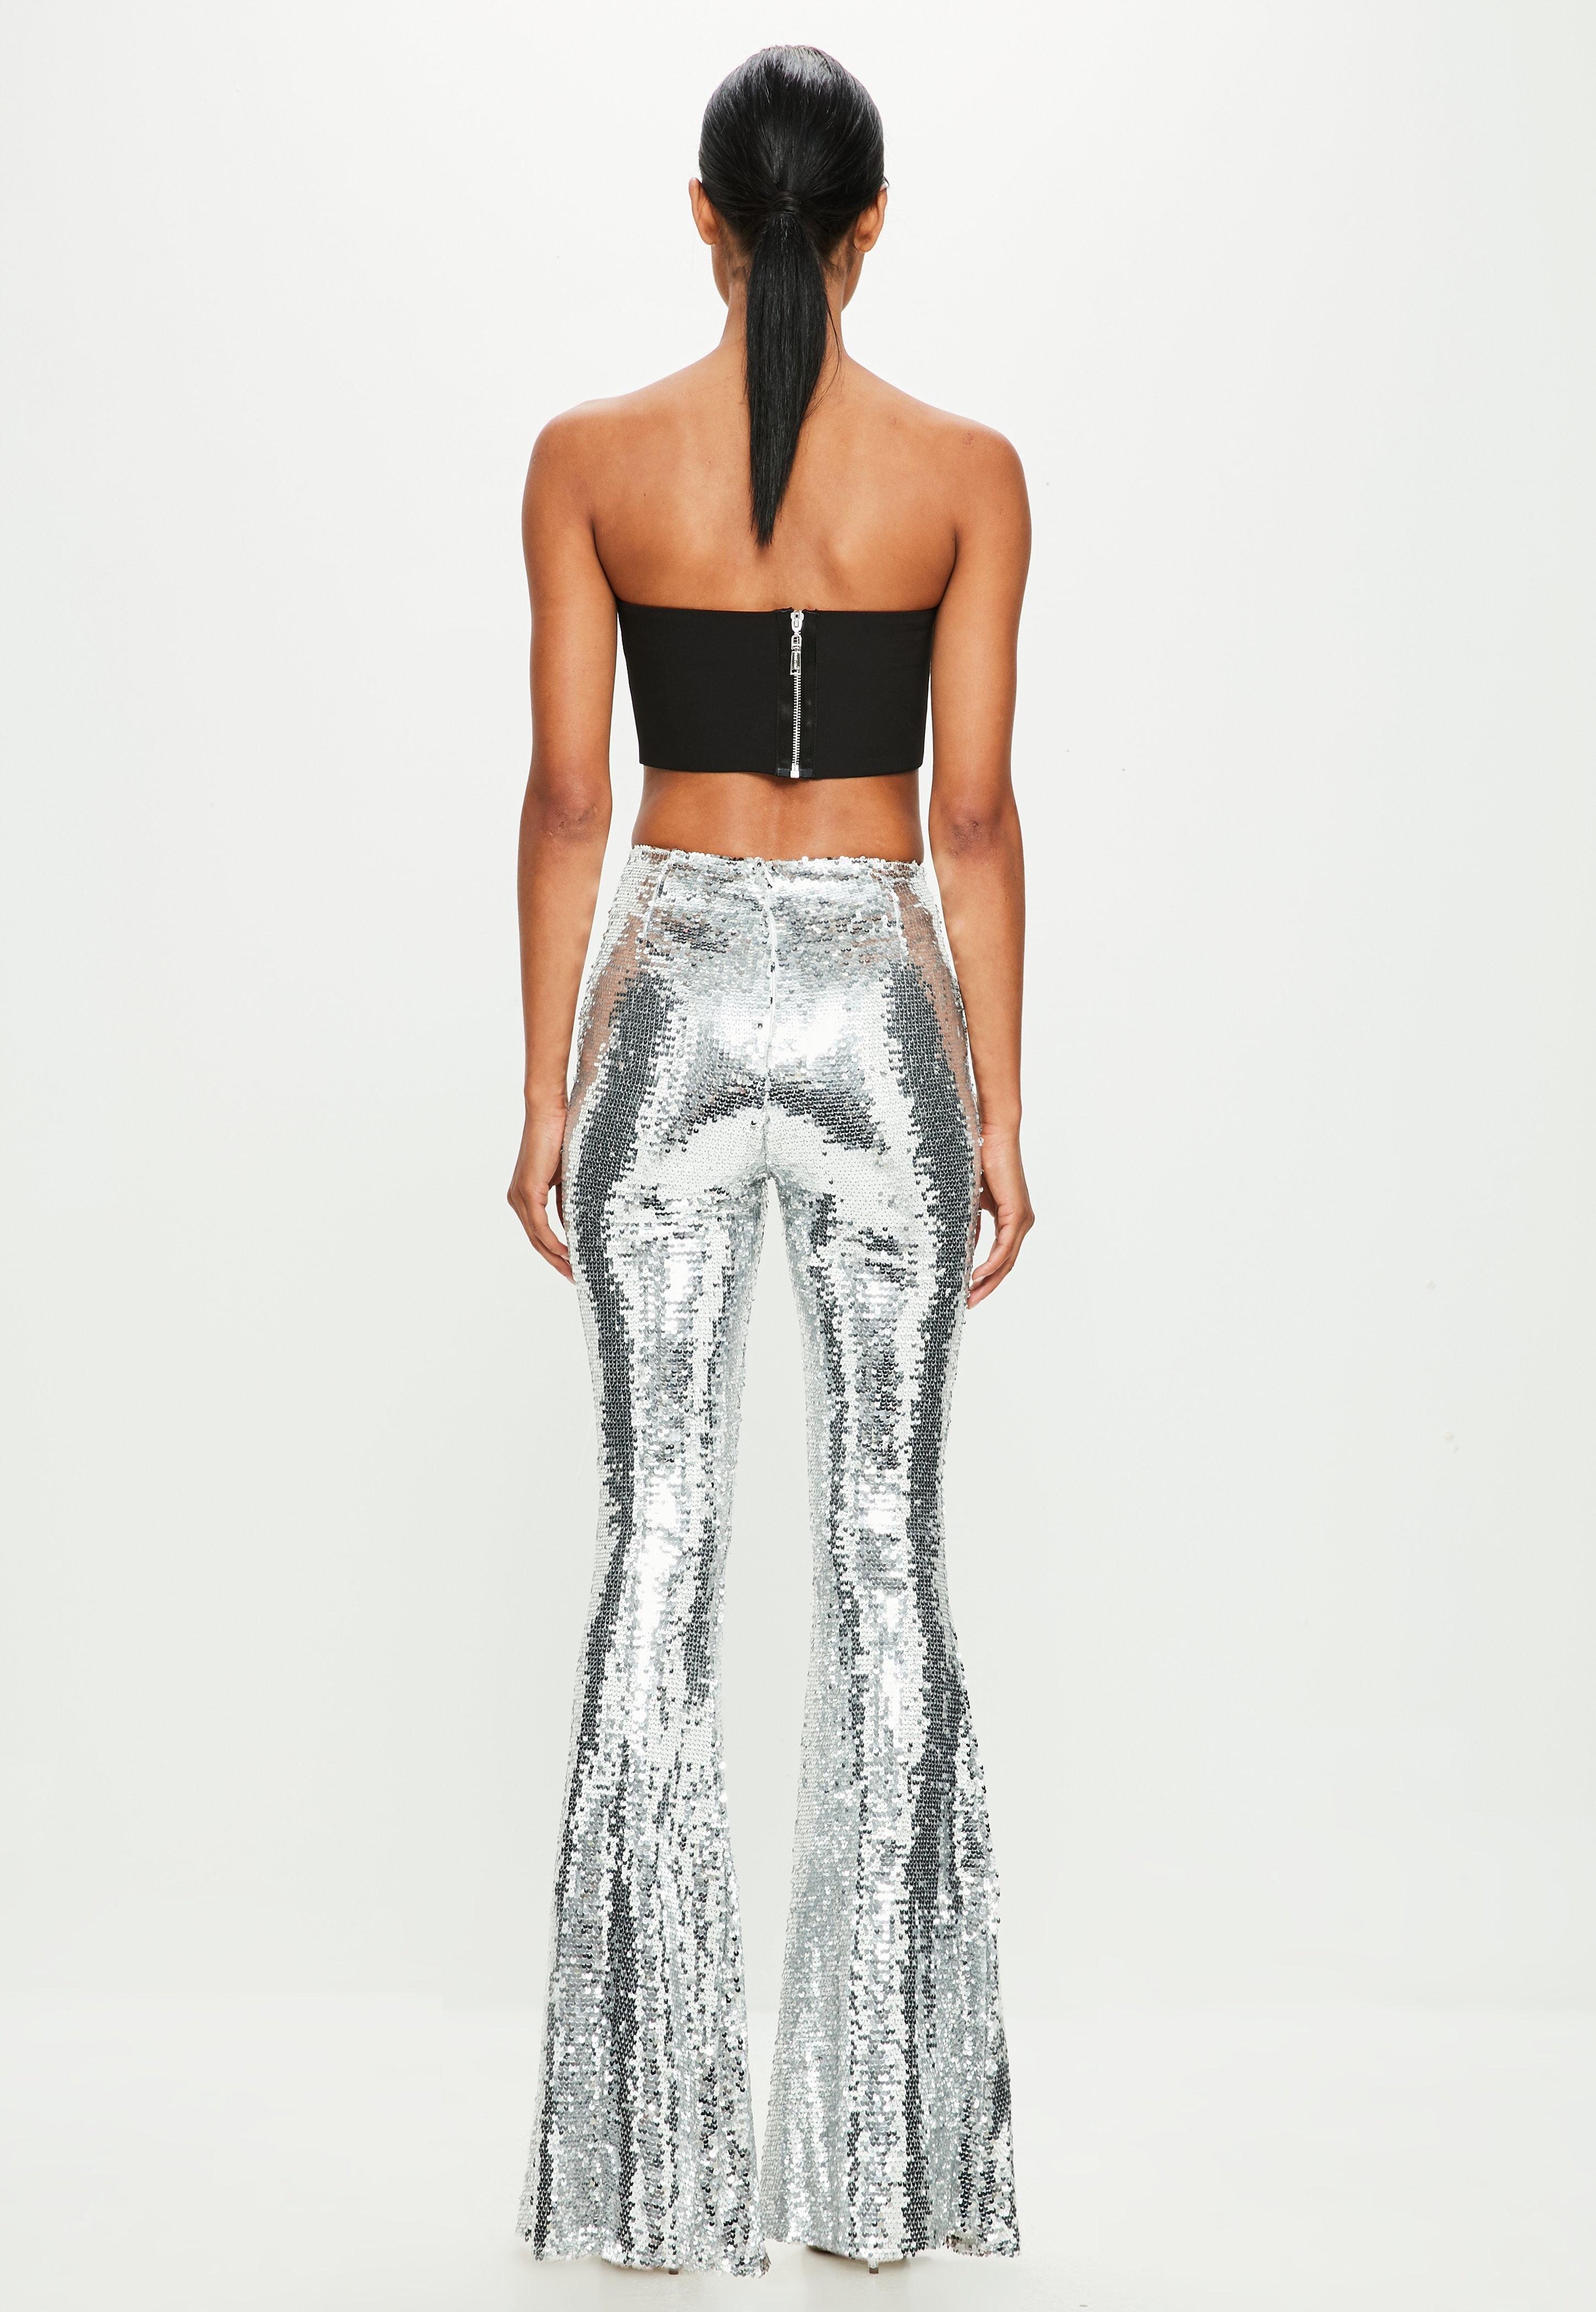 Missguided Peace + Love Silver Sequin Flared Leg Pants in Metallic - Lyst